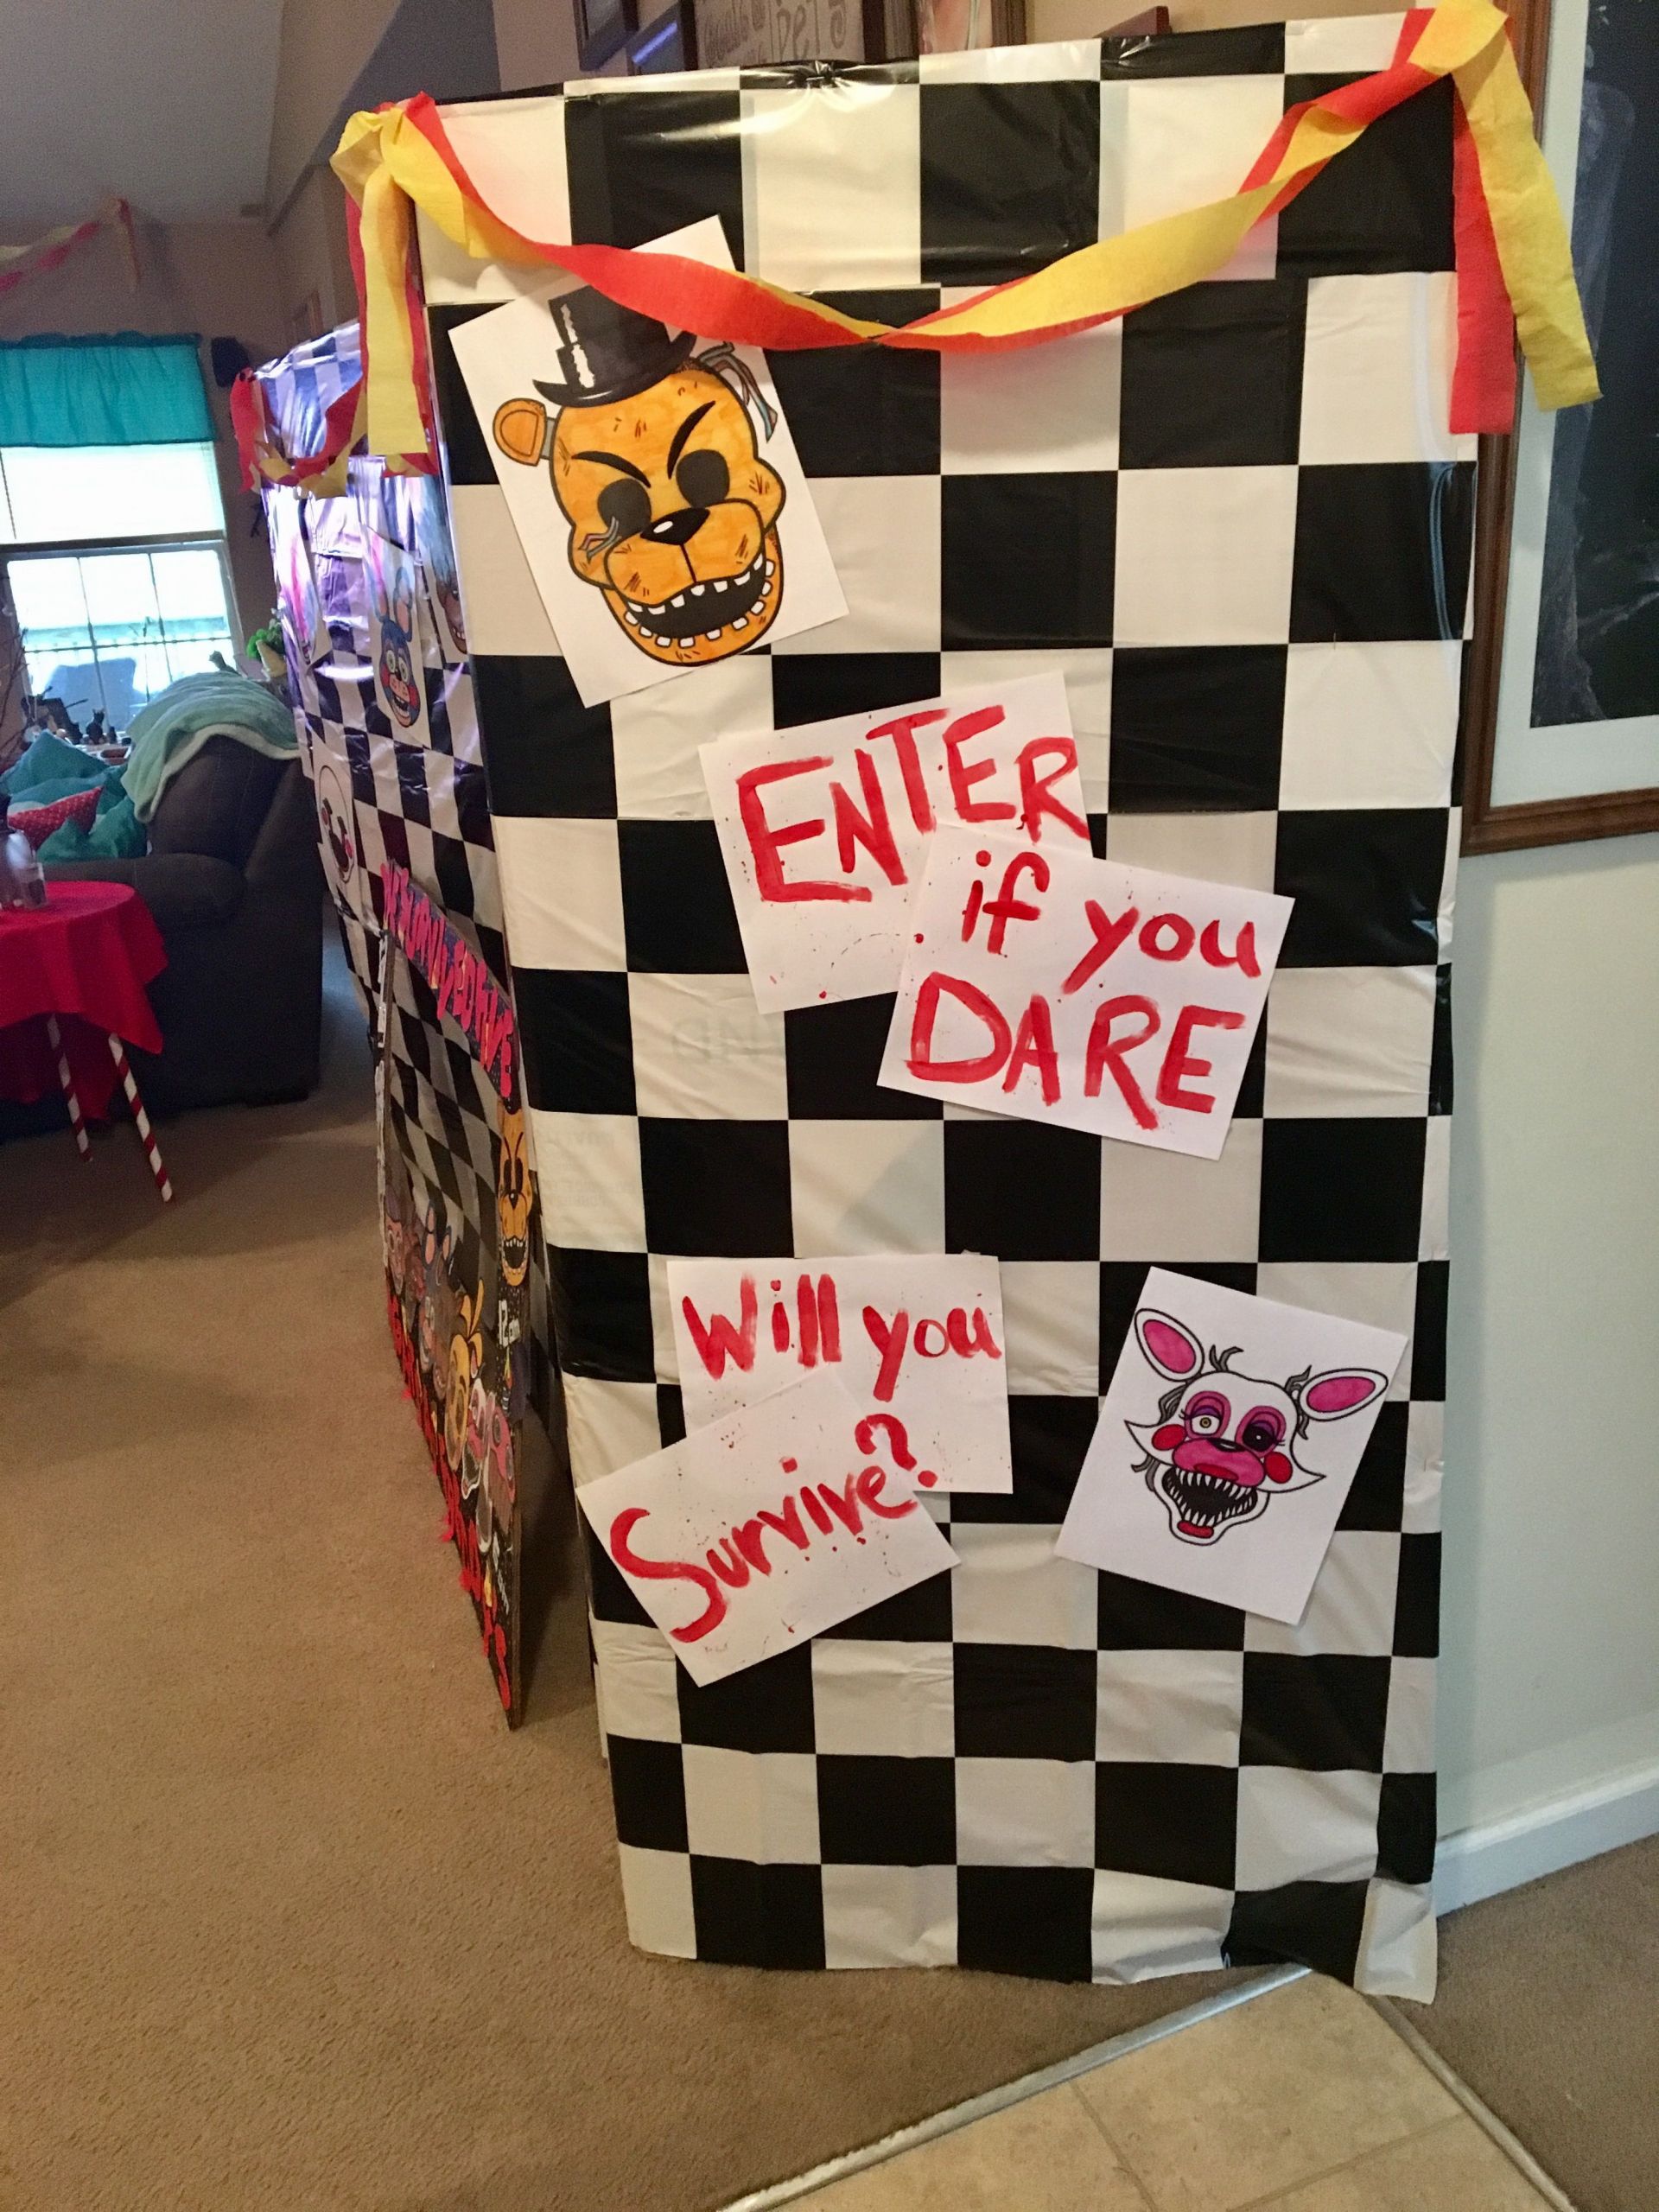 Fnaf Birthday Party Ideas
 FNAF birthday The entrance to our party